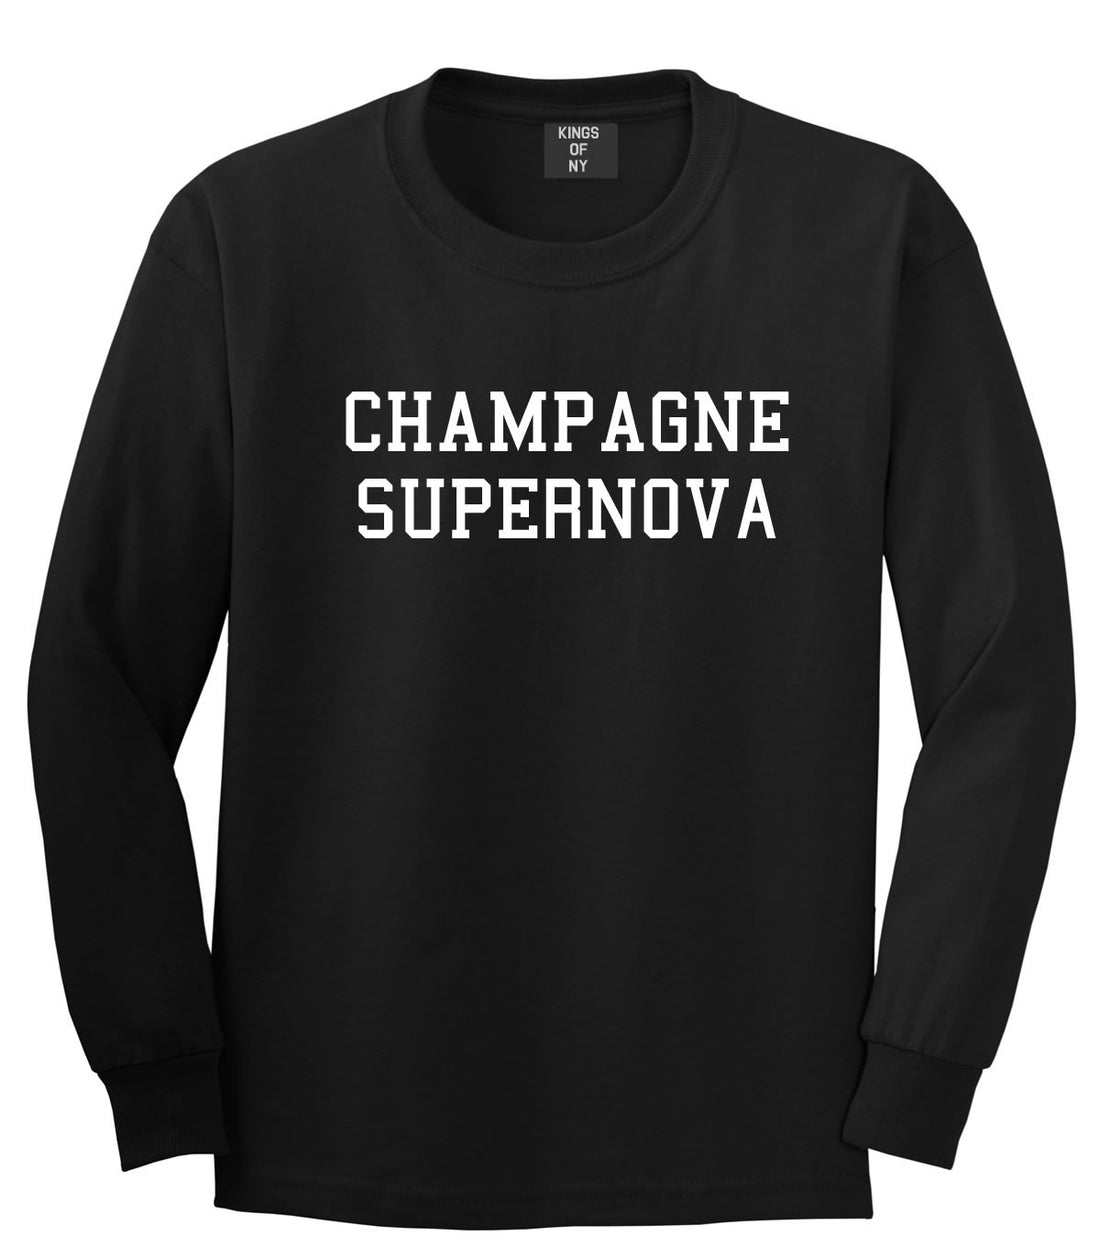 Champagne Supernova Long Sleeve T-Shirt in Black by Kings Of NY